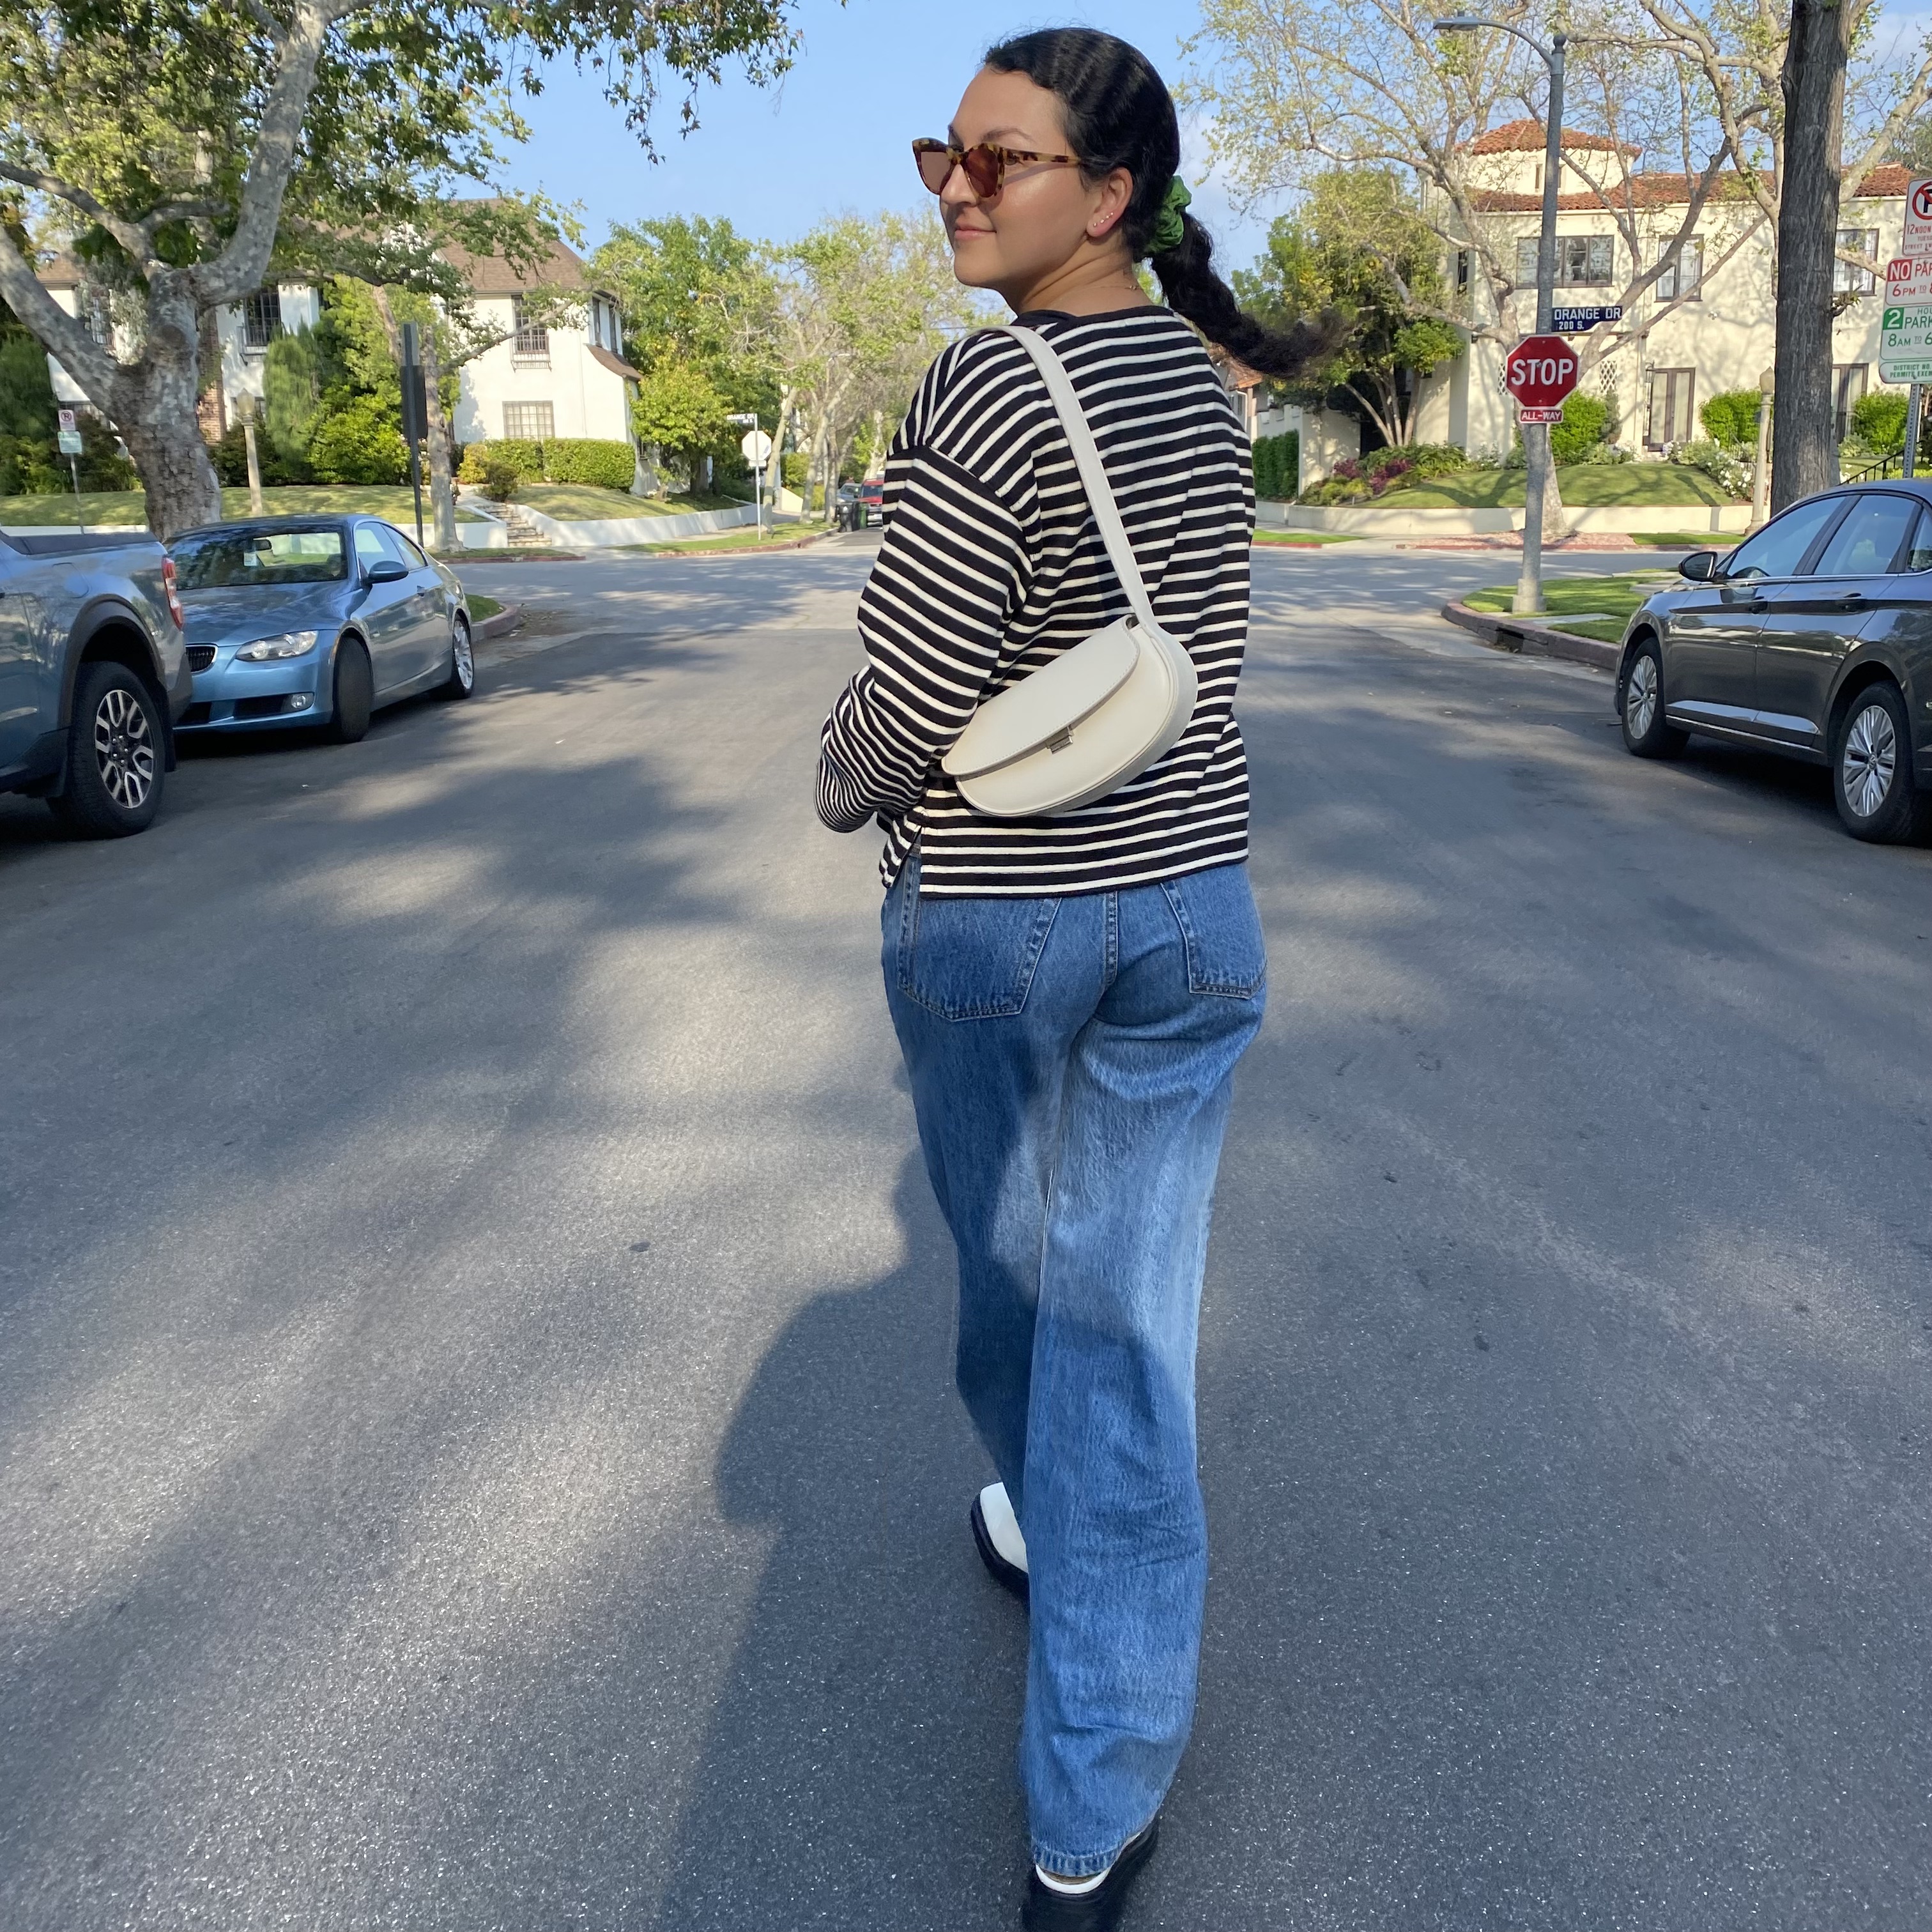 Woman in a striped shirt, jeans, white shoes, and a cream handbag.